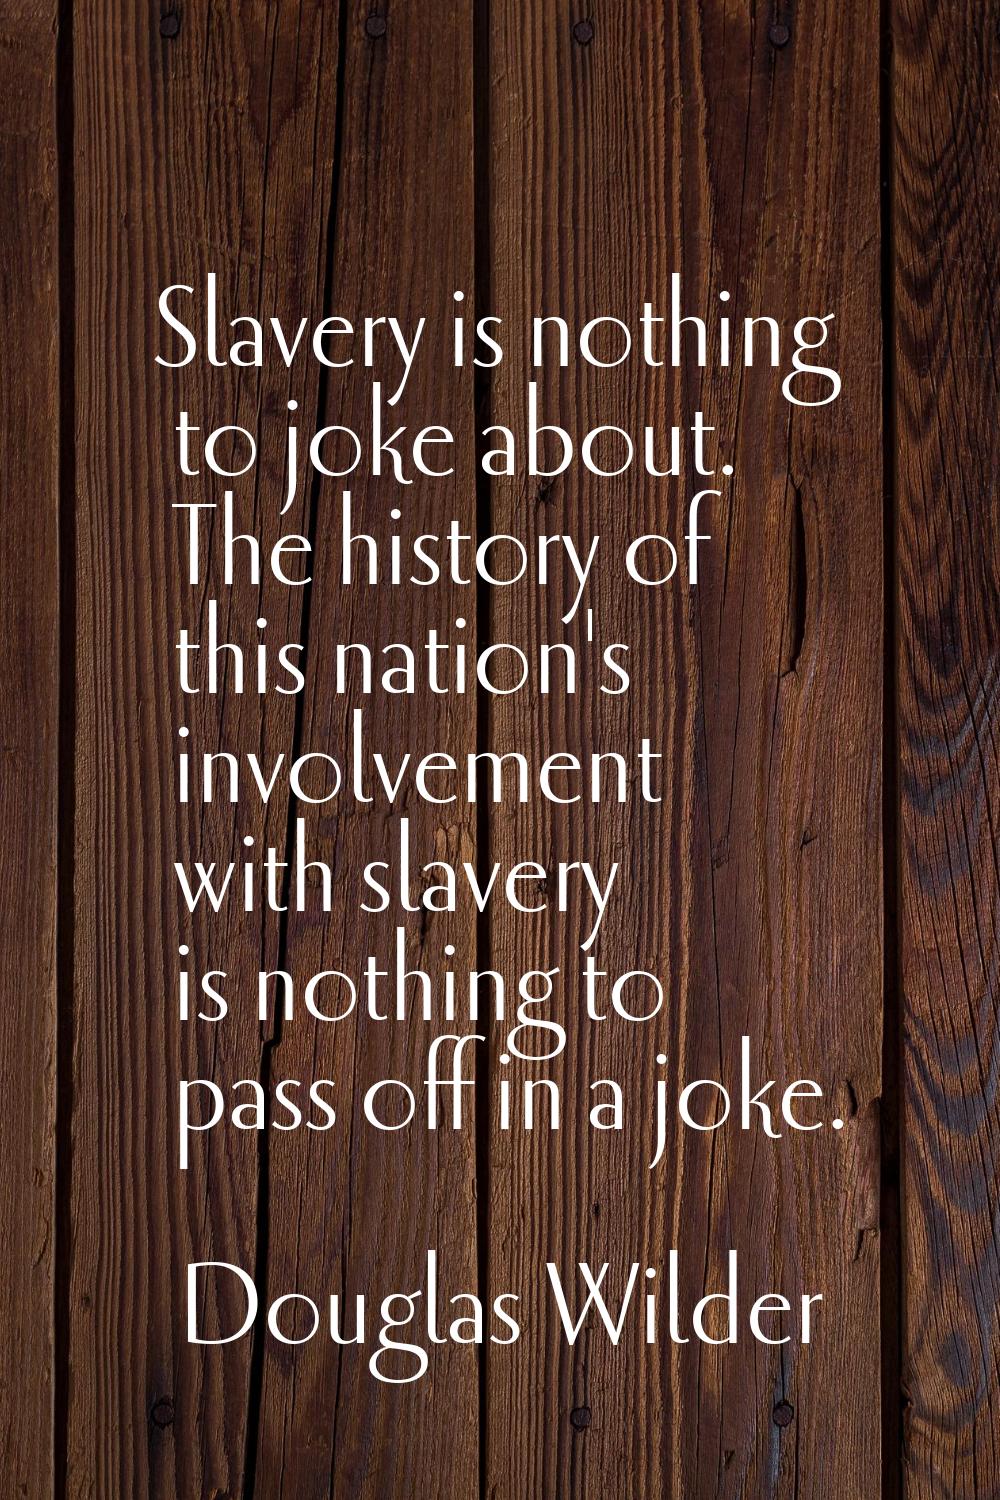 Slavery is nothing to joke about. The history of this nation's involvement with slavery is nothing 